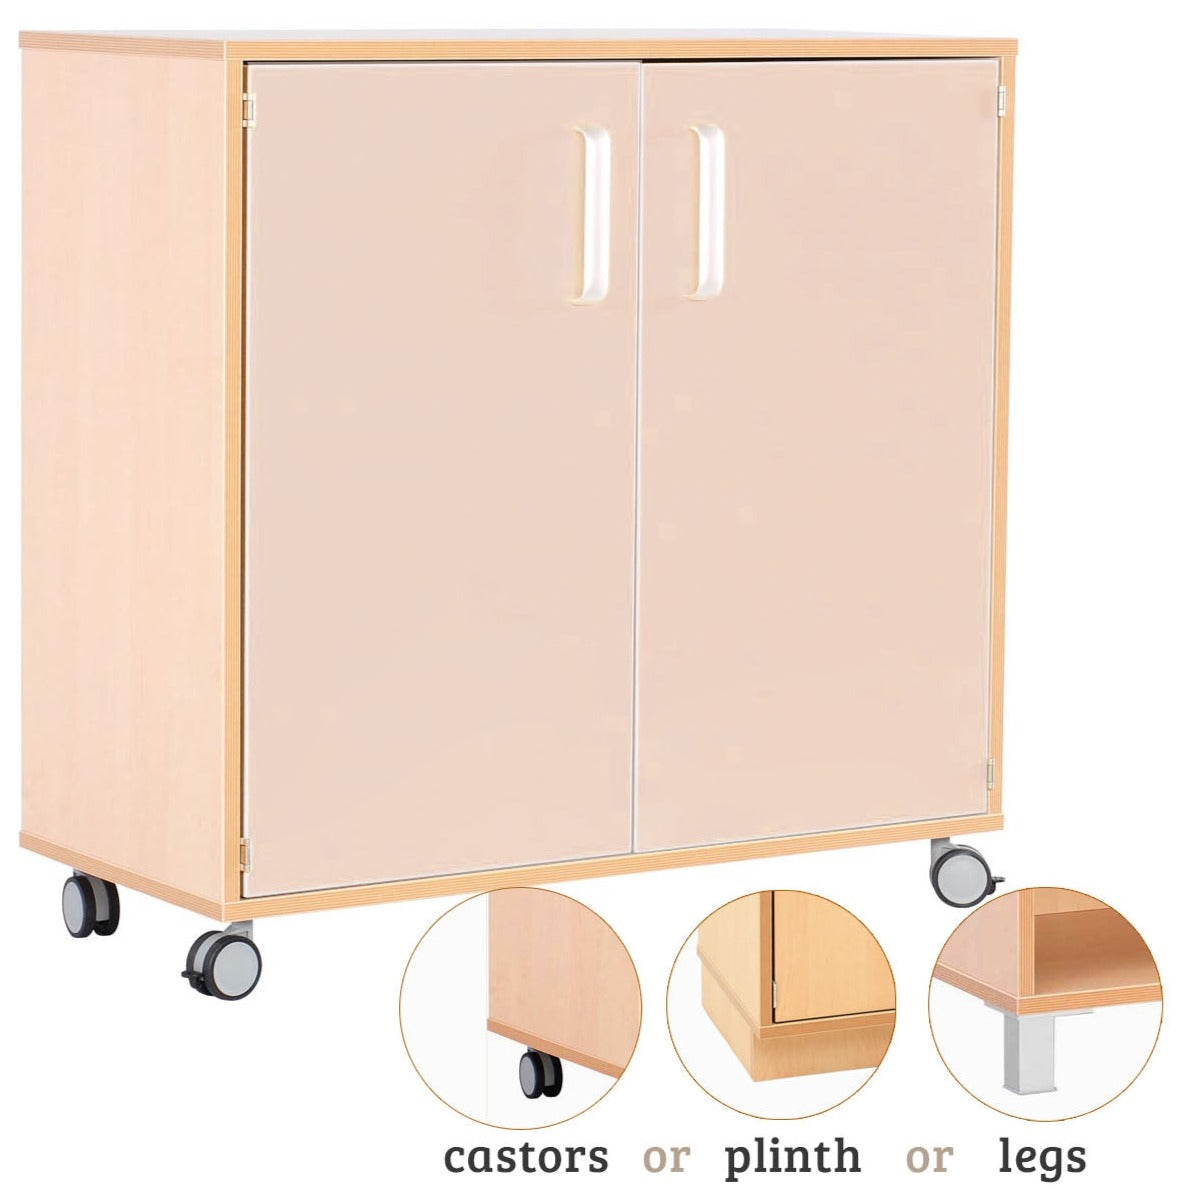 Flexi M cabinet with choice of Base - All Colours